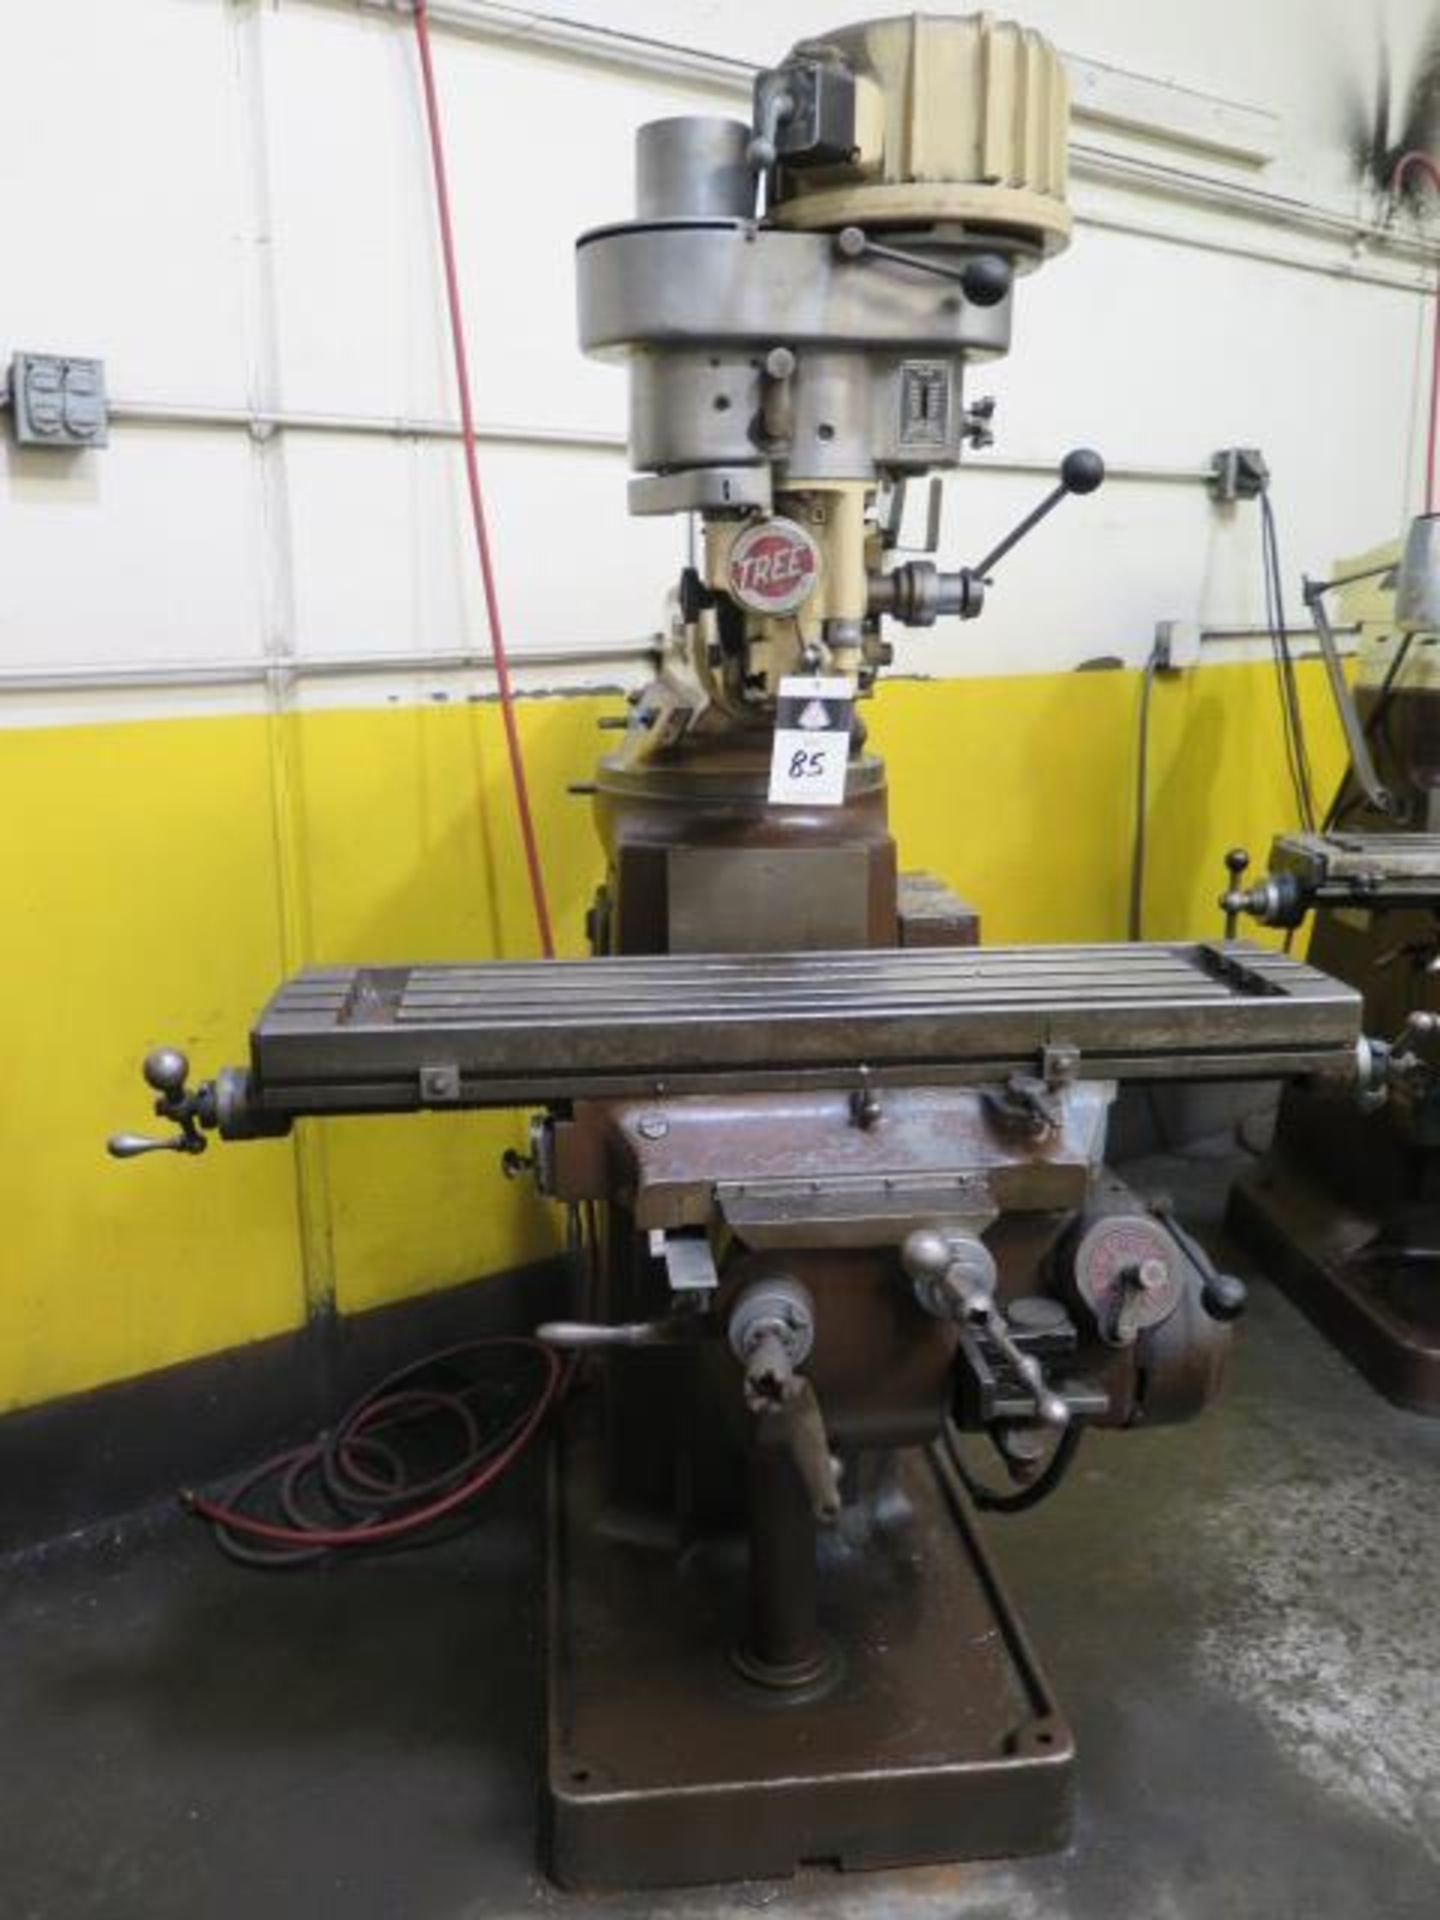 Tree 2UVR Vertical Mill s/n 7989 w/ 60-3300 RPM, Colleted Spindle, PF, 10 ½” x 42” Table, SOLD AS IS